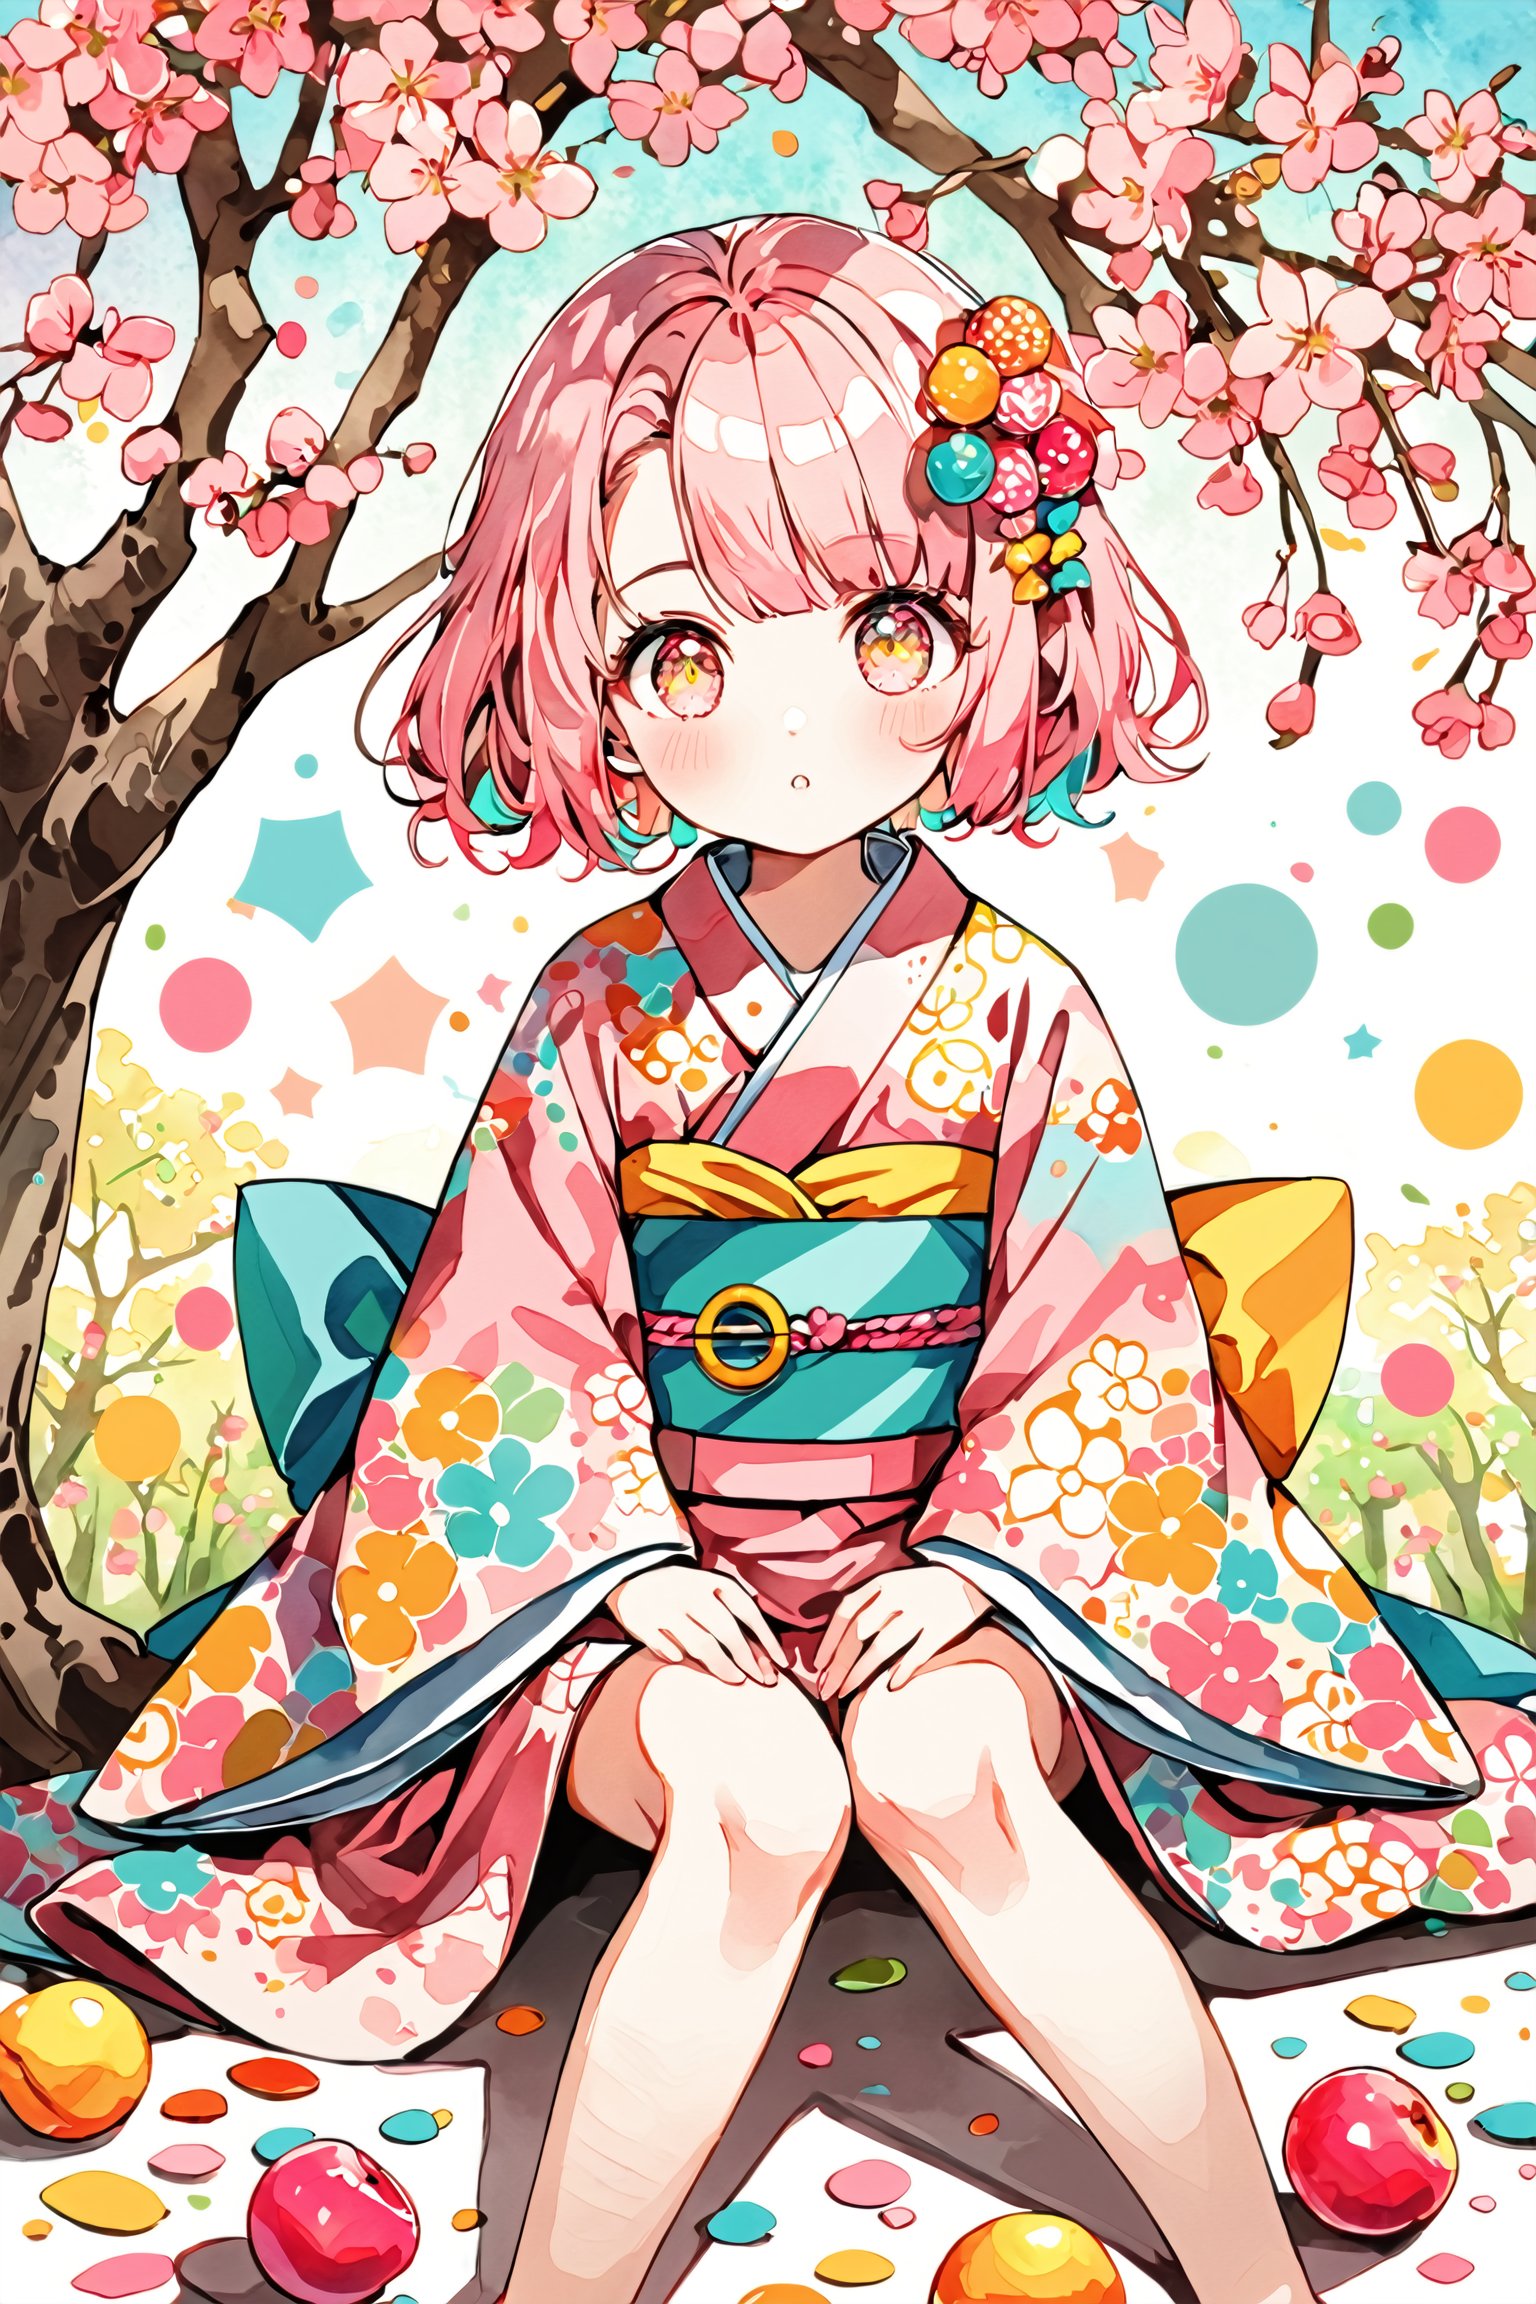 children's doodle style,
Colorful pop art, candy pop, lollipop punk, brightly colored berry beans, Konohanasakuya-hime seated gracefully beneath a blooming peach tree. She wears a traditional kimono with soft pink and white floral patterns, her hair adorned with fresh blossoms,dal-6 style,Color Splash,dramaticwatercolor,aihoshinopose